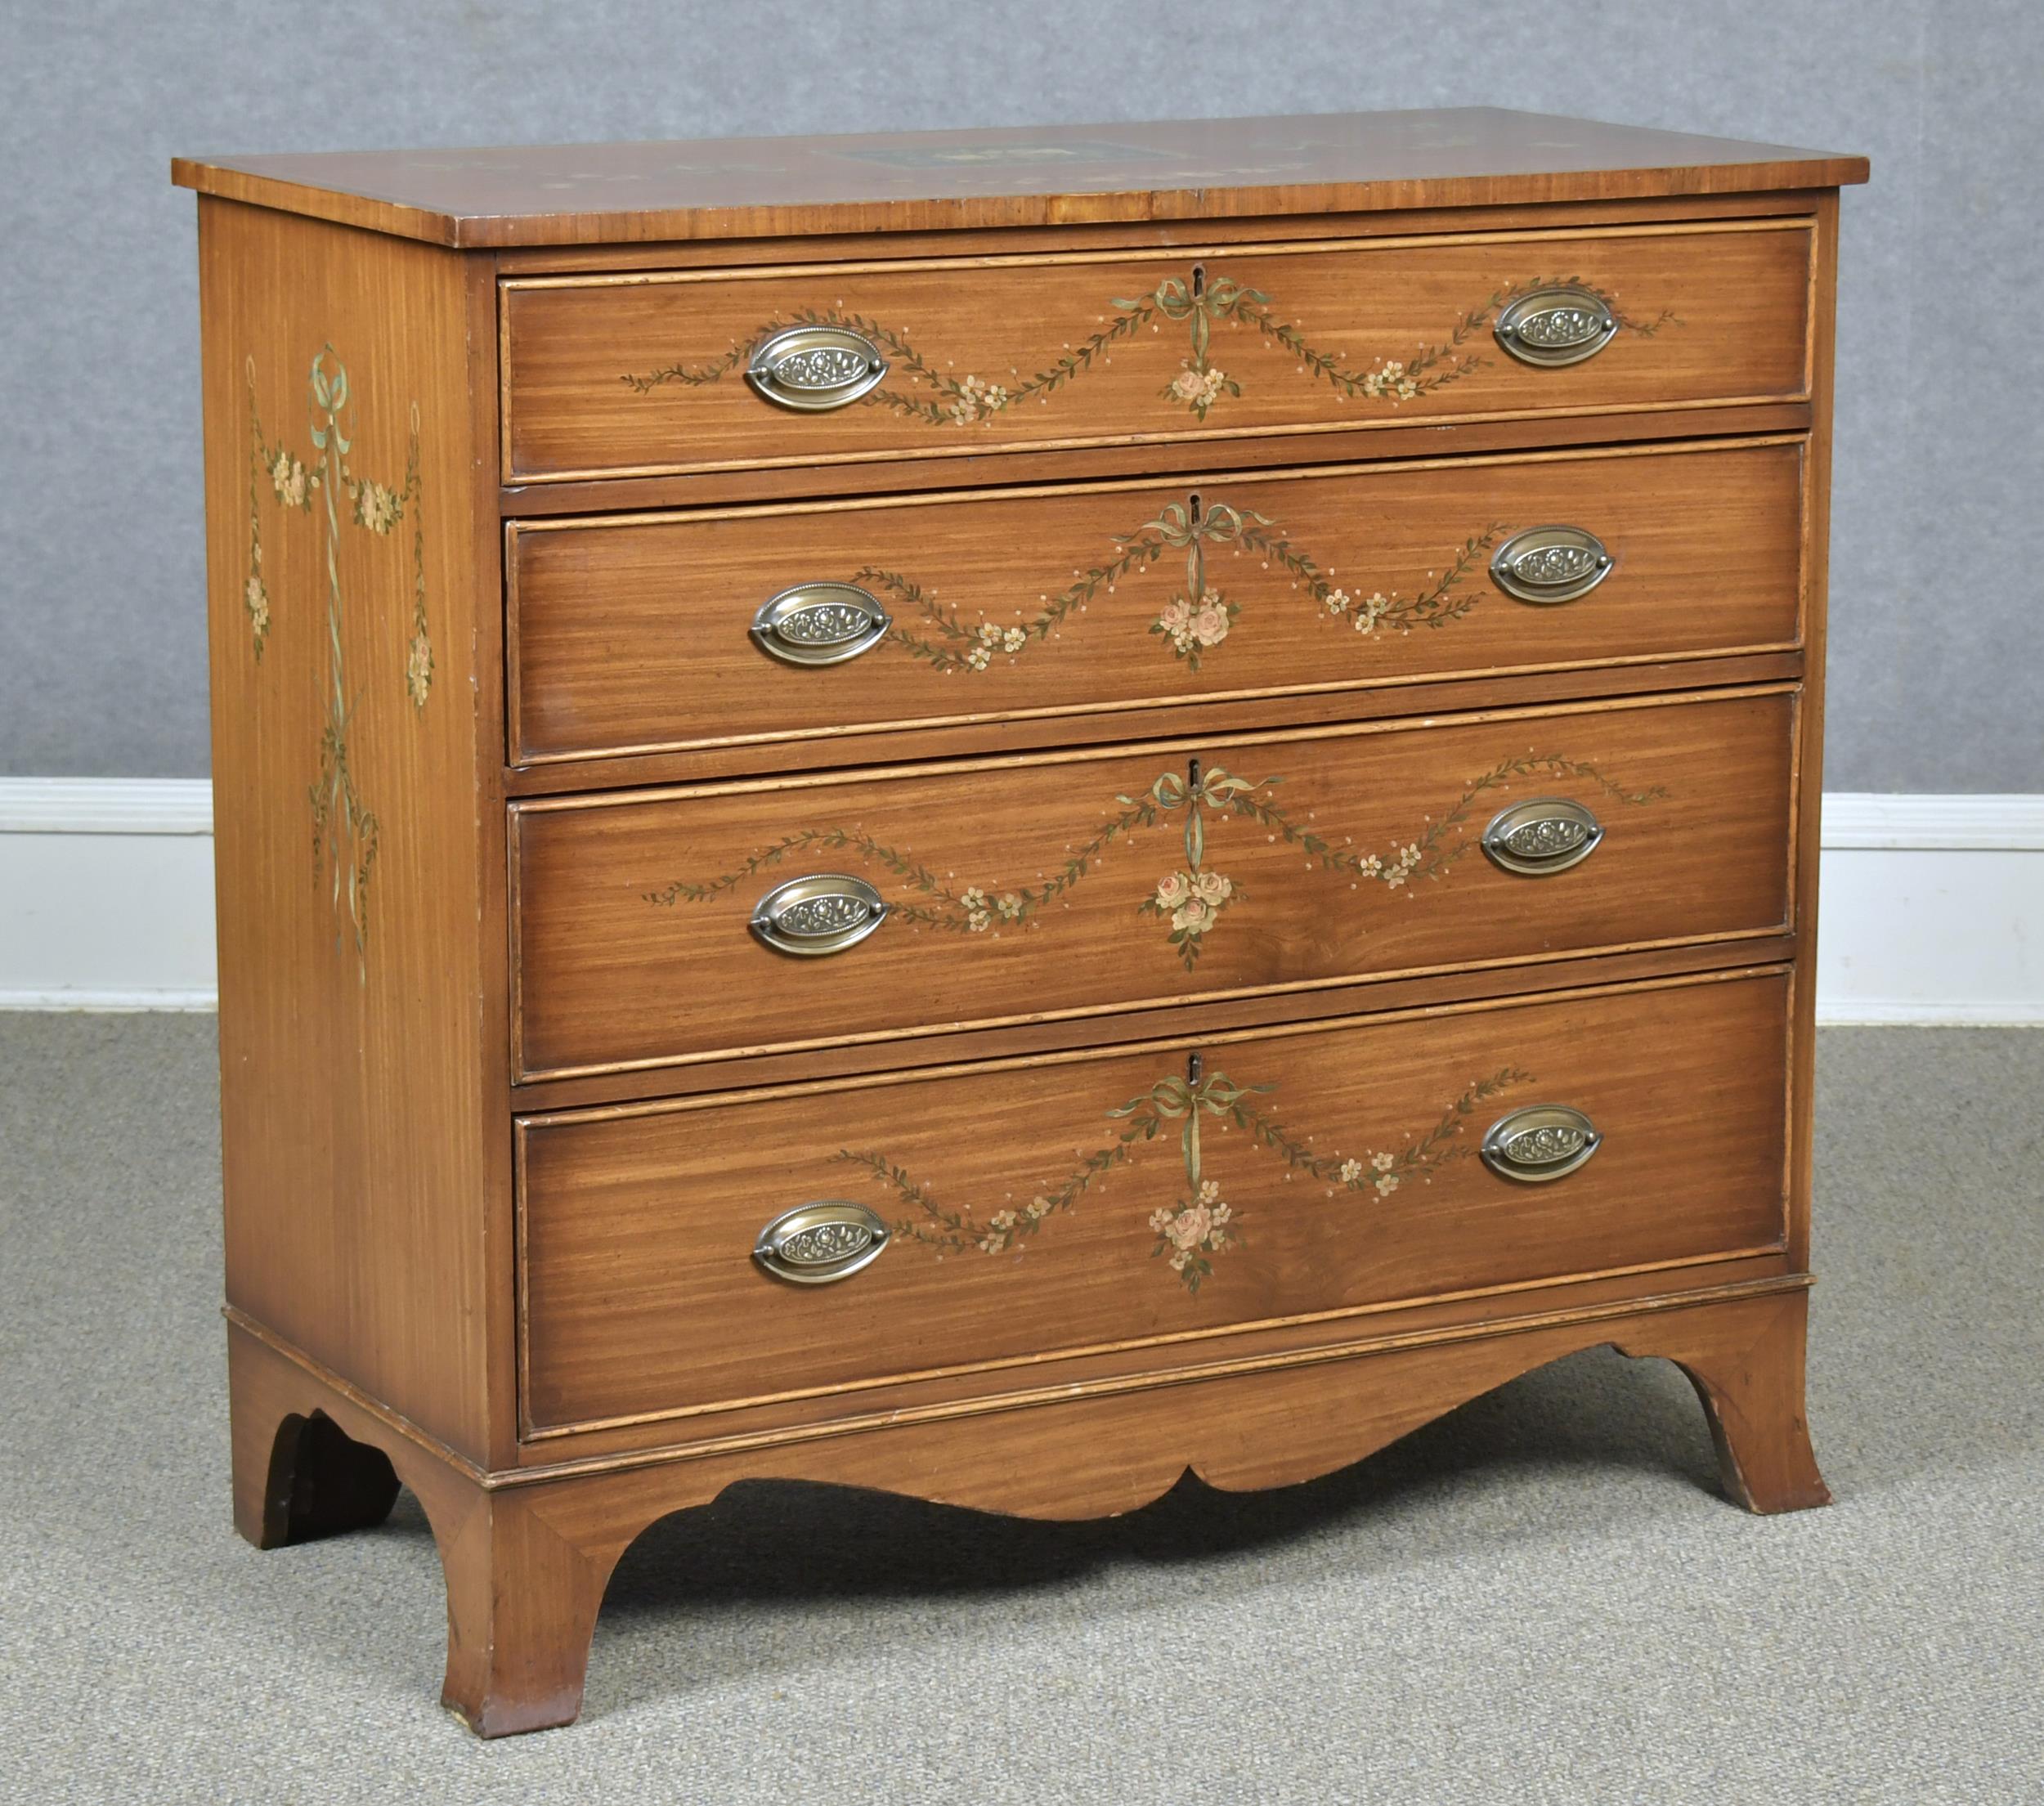 PAINT DECORATED ADAMS STYLE SATINWOOD 29e123